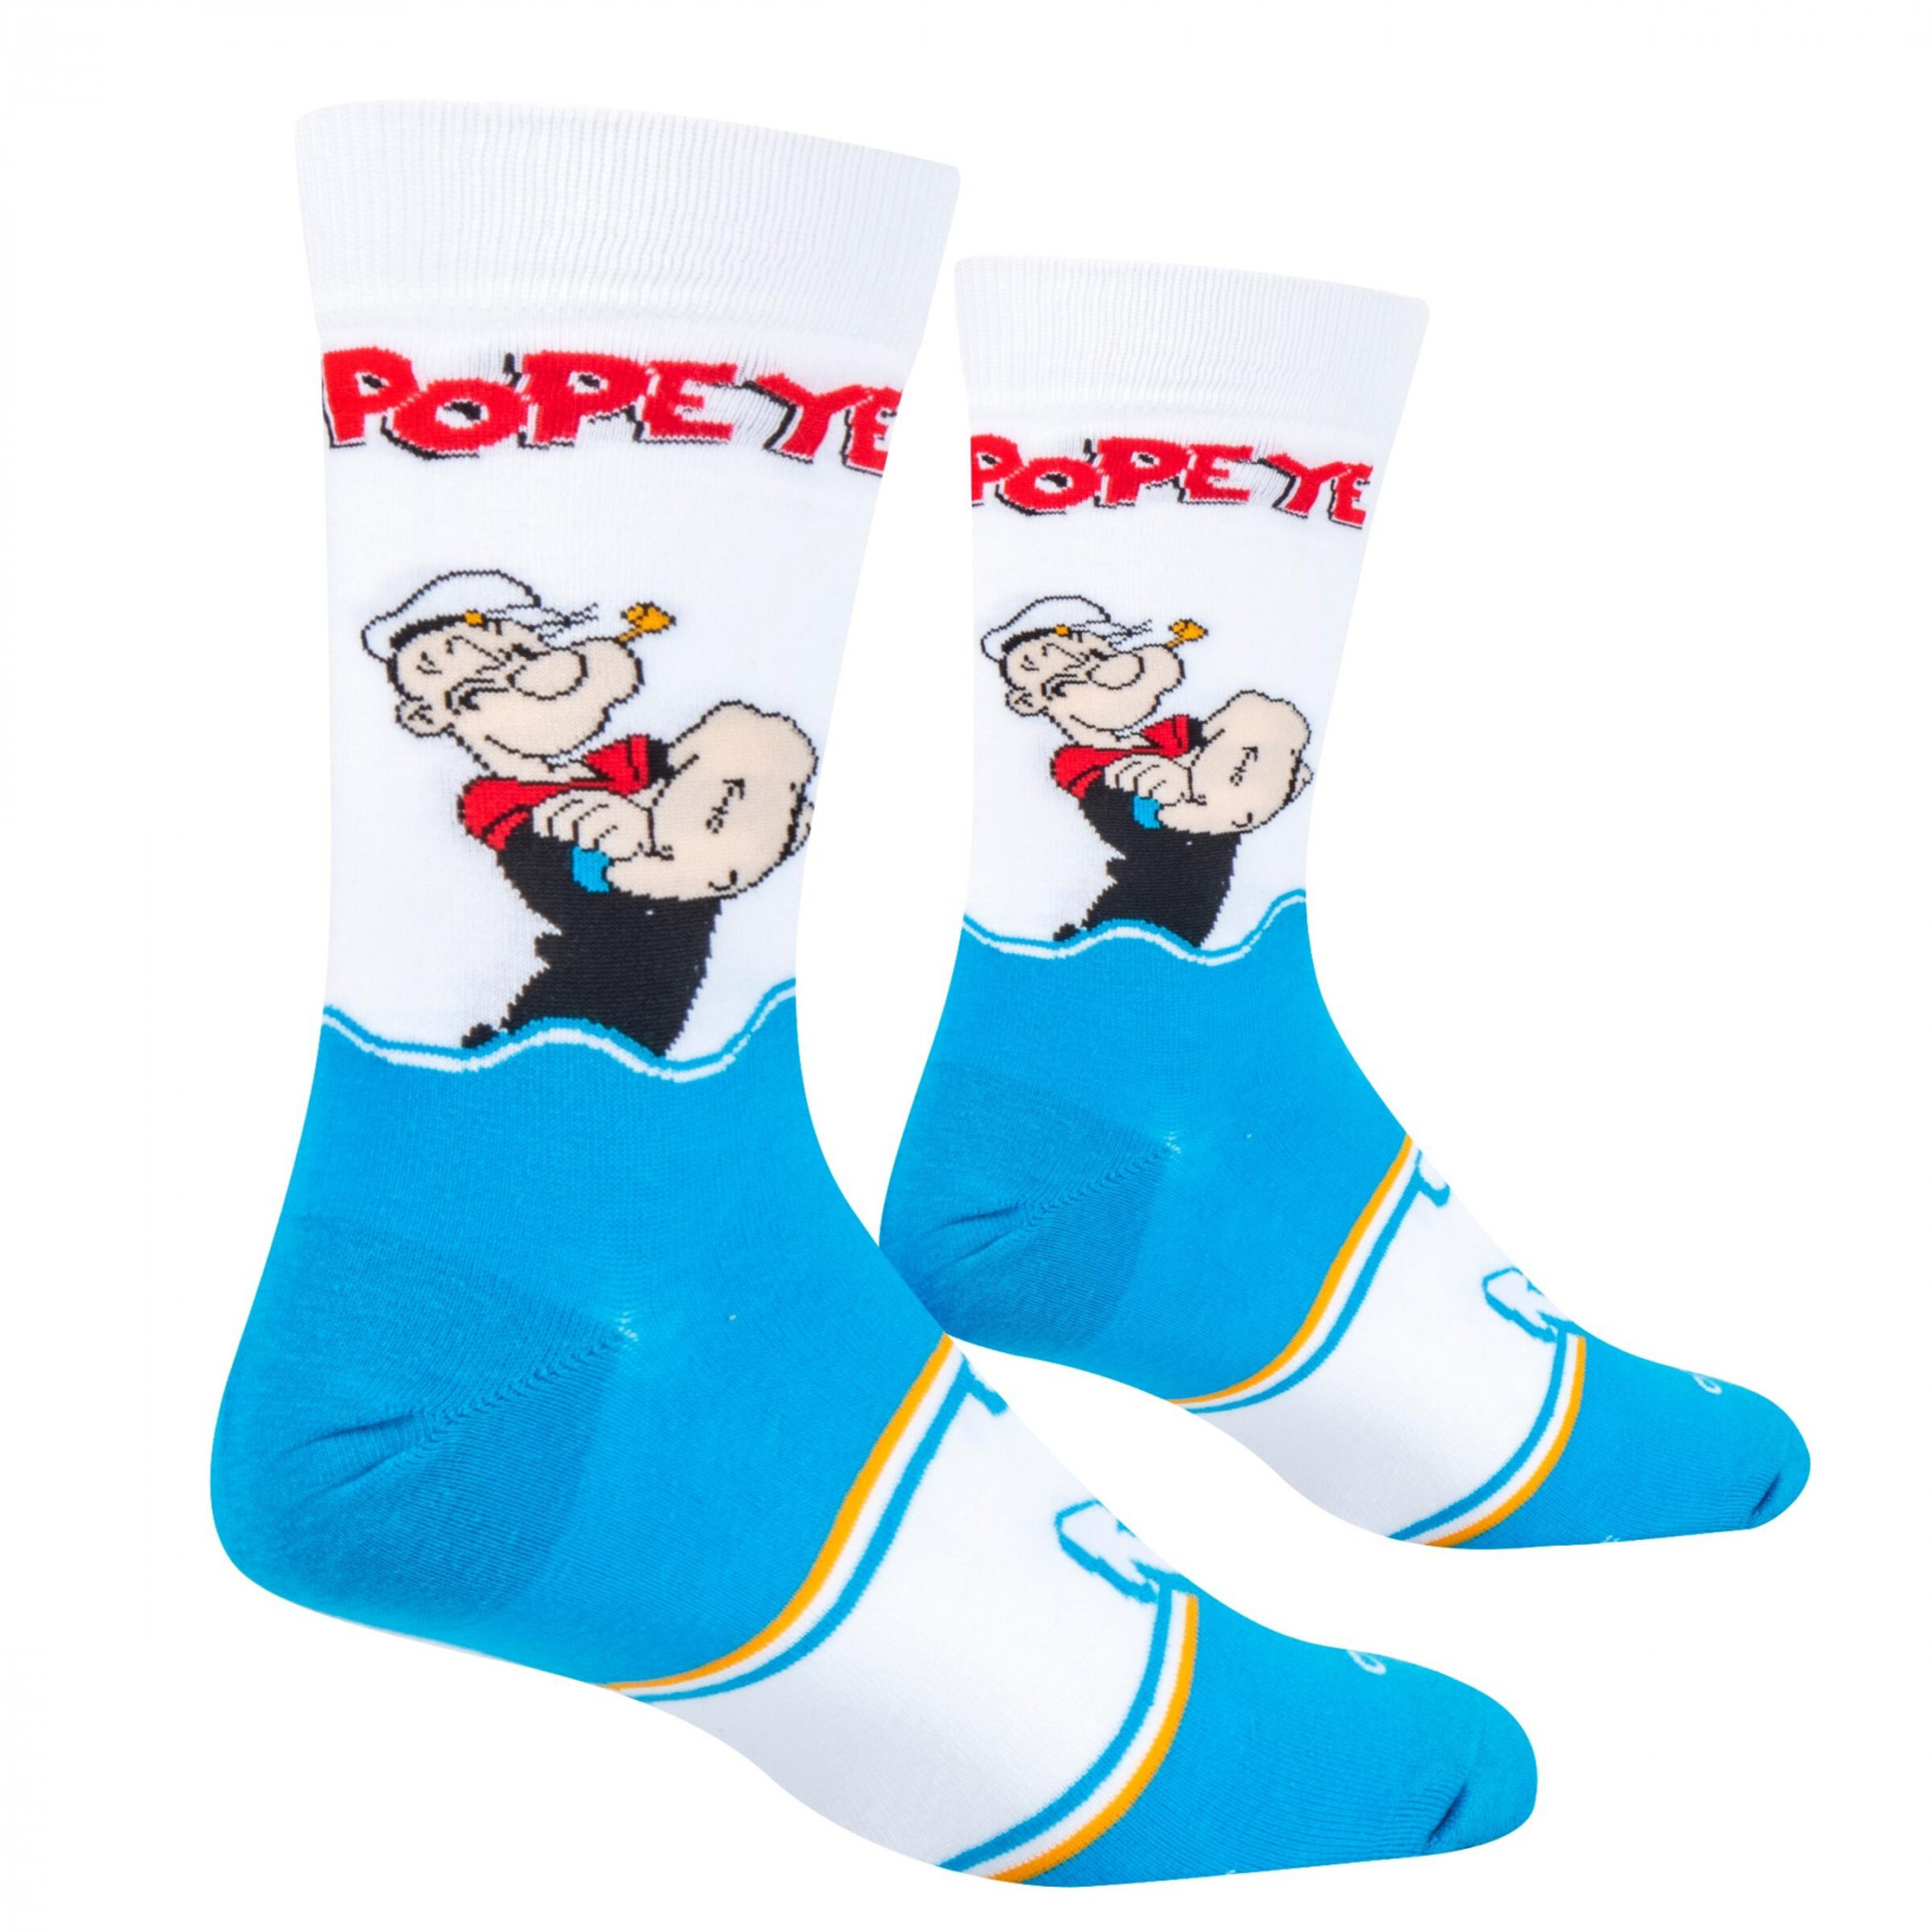 Popeye the Sailor Out at Sea Crew Socks